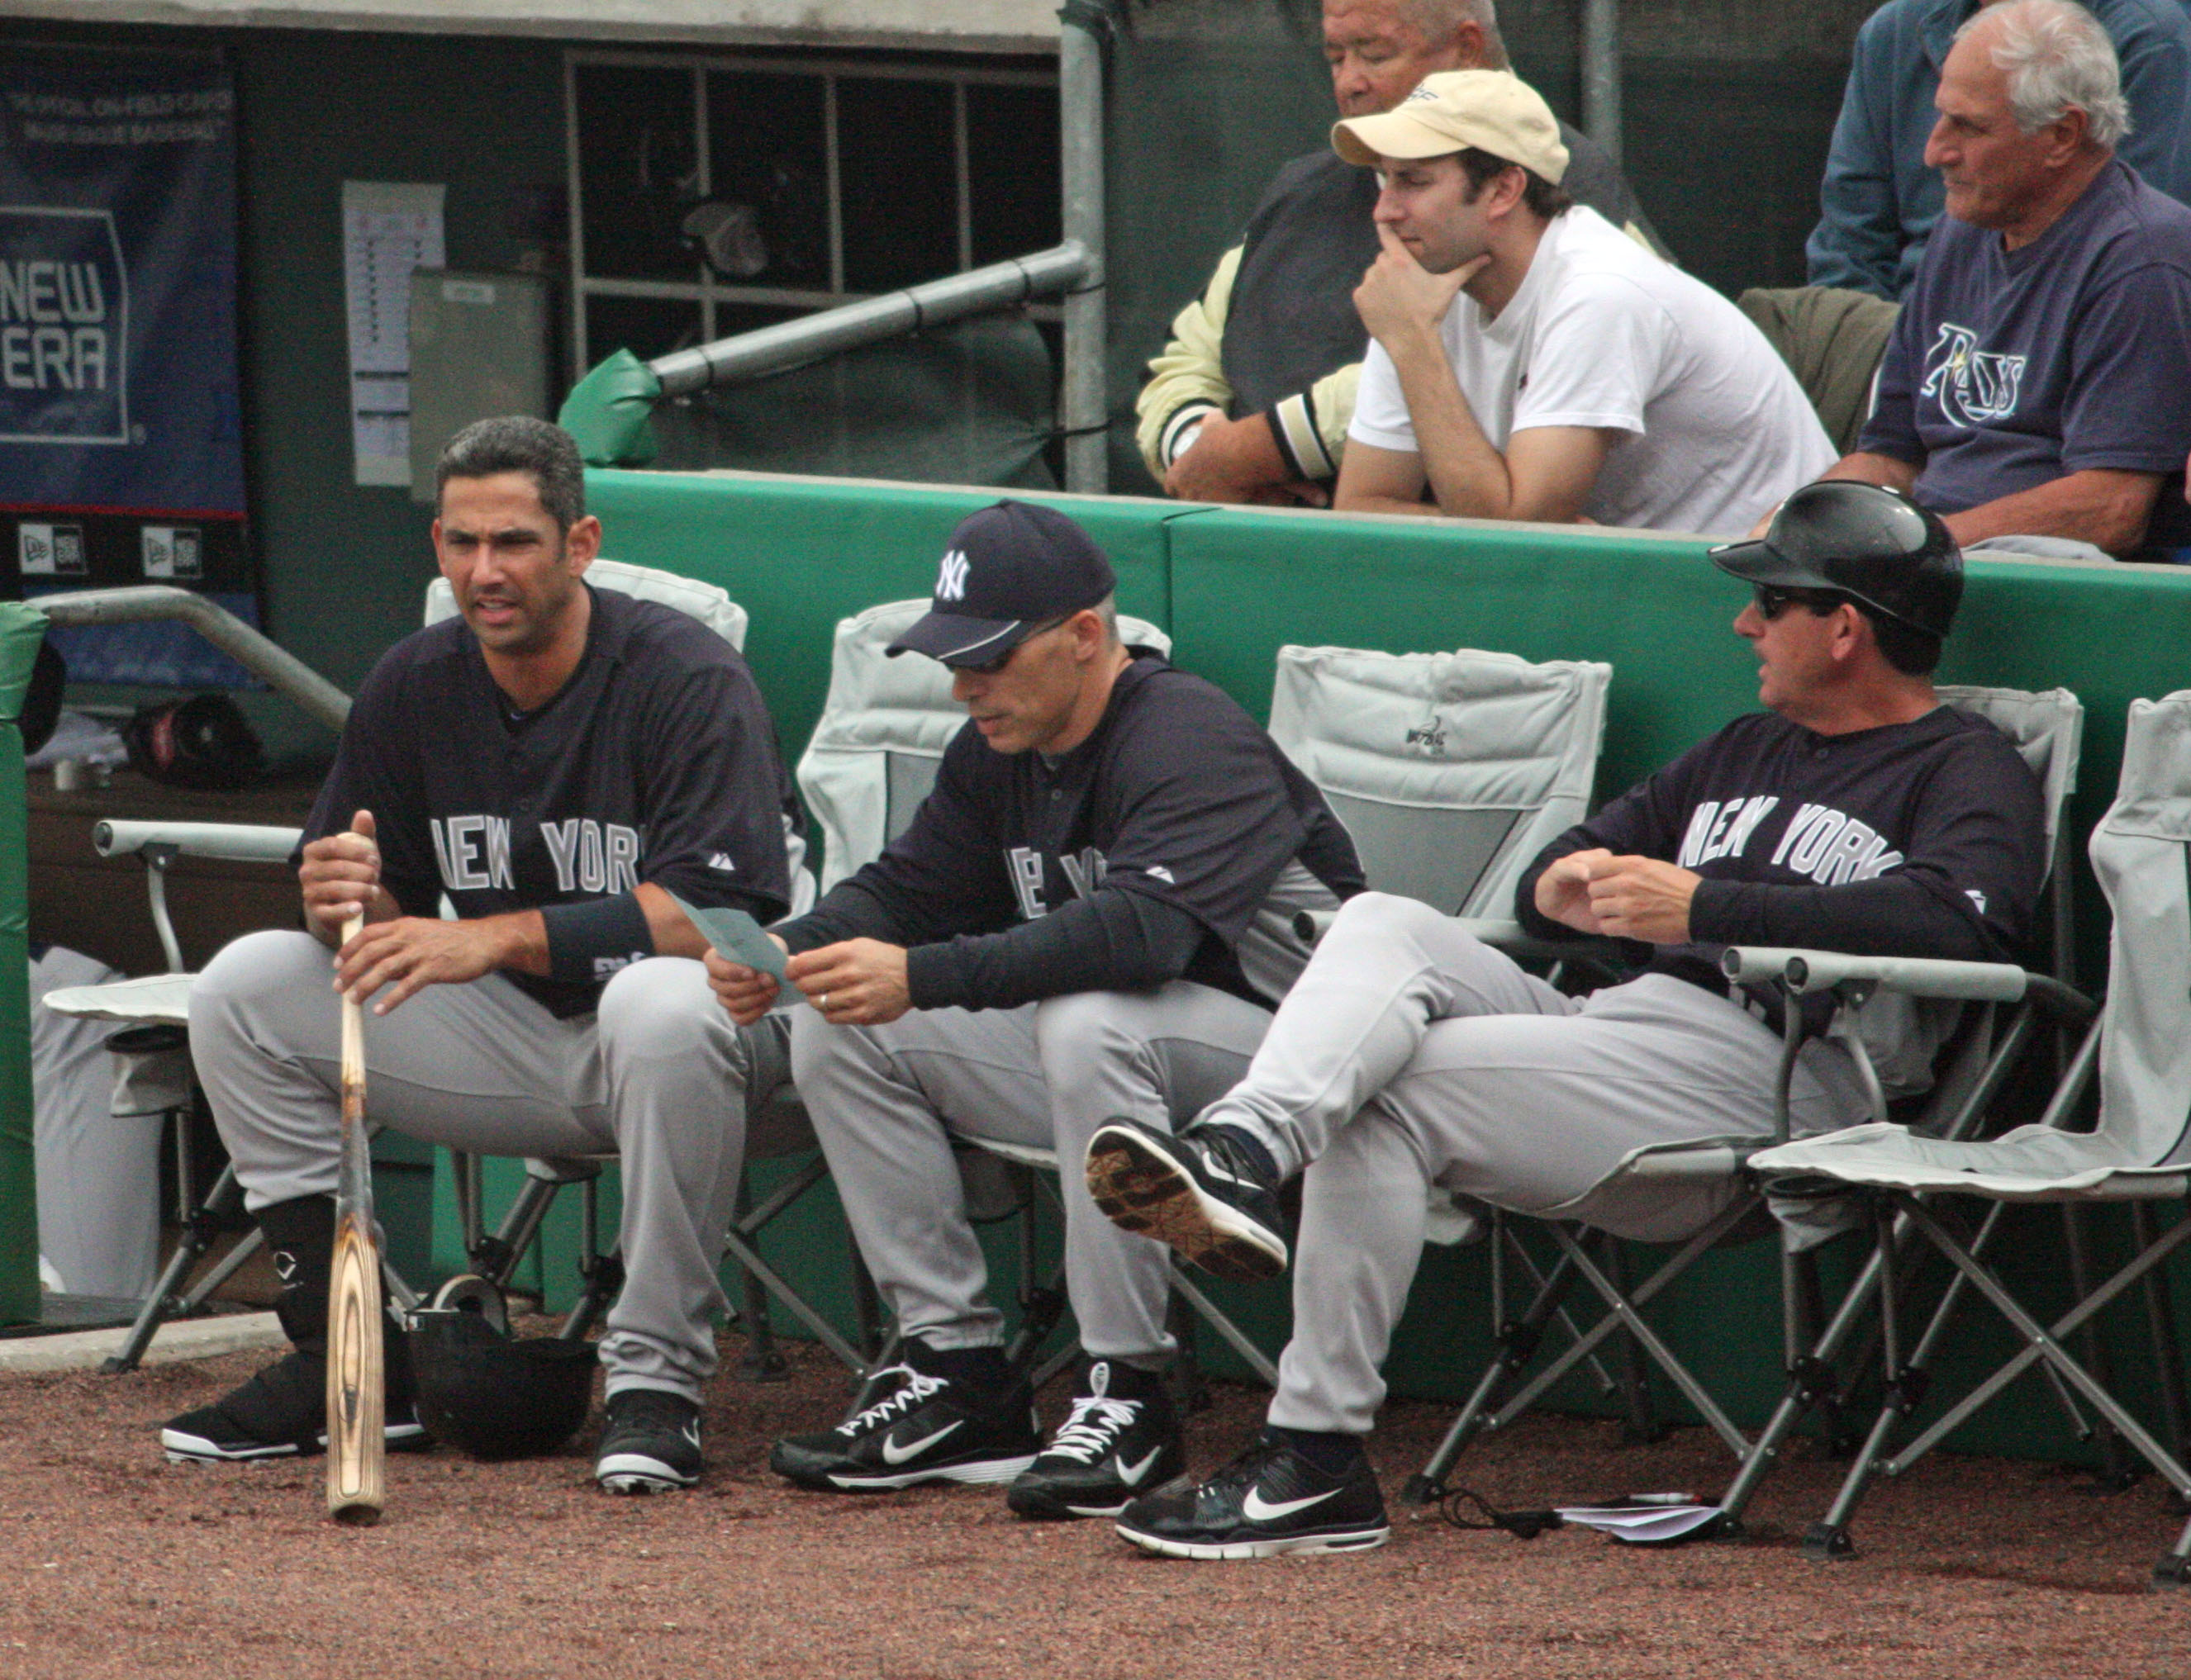 an-only-in-exhibition-ball-shot-posada-and-girardi-seated-outside-the-dugout.jpg 